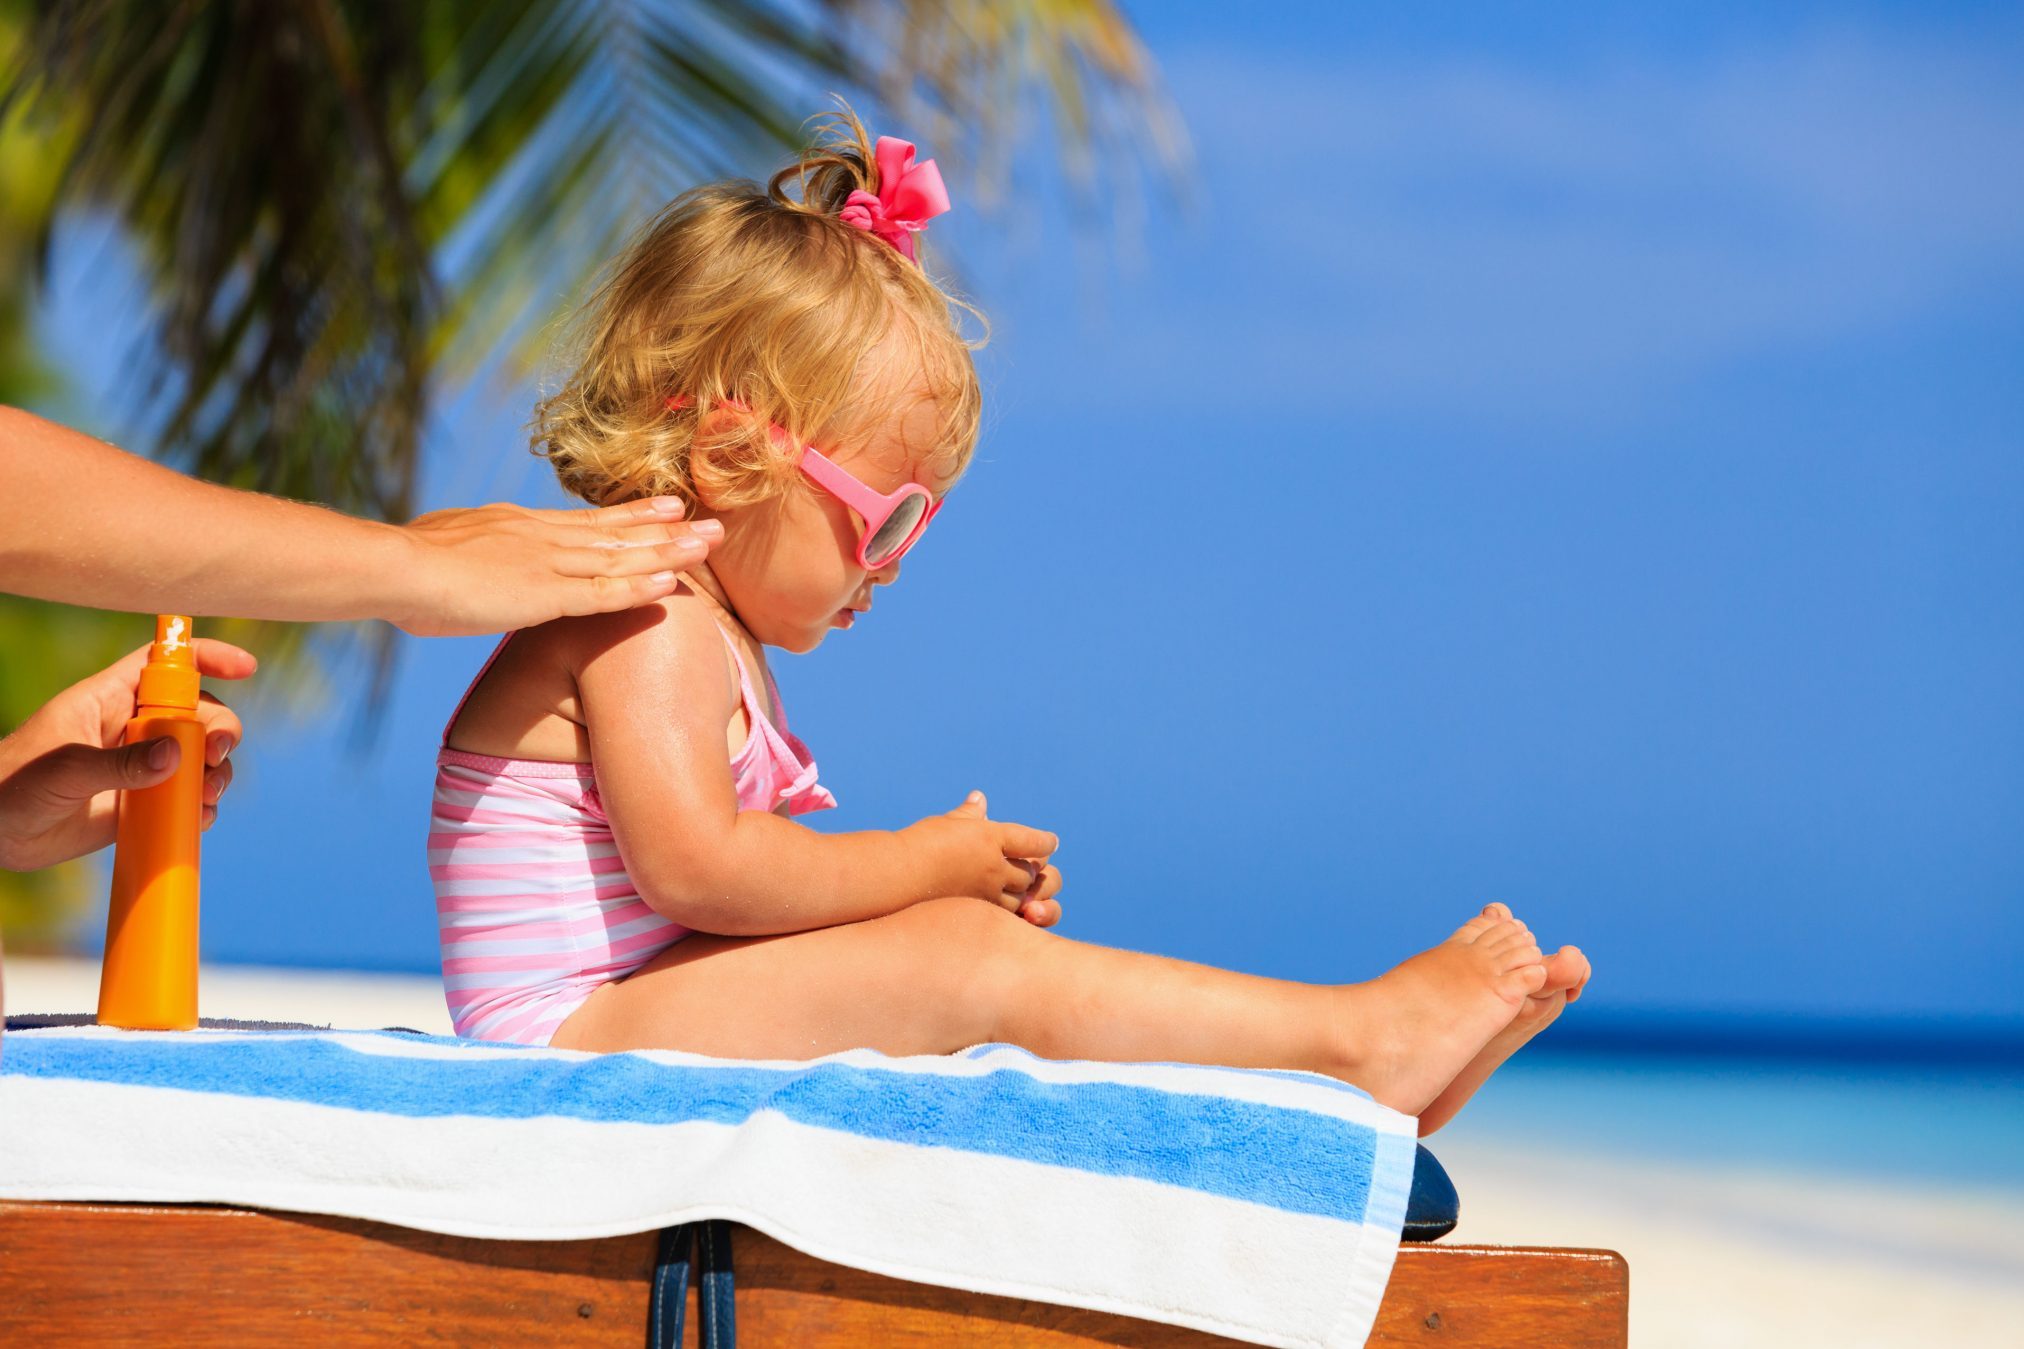 Is Sunscreen Dangerous? Five Biggest Sunscreen Mistakes - Intracoastal 